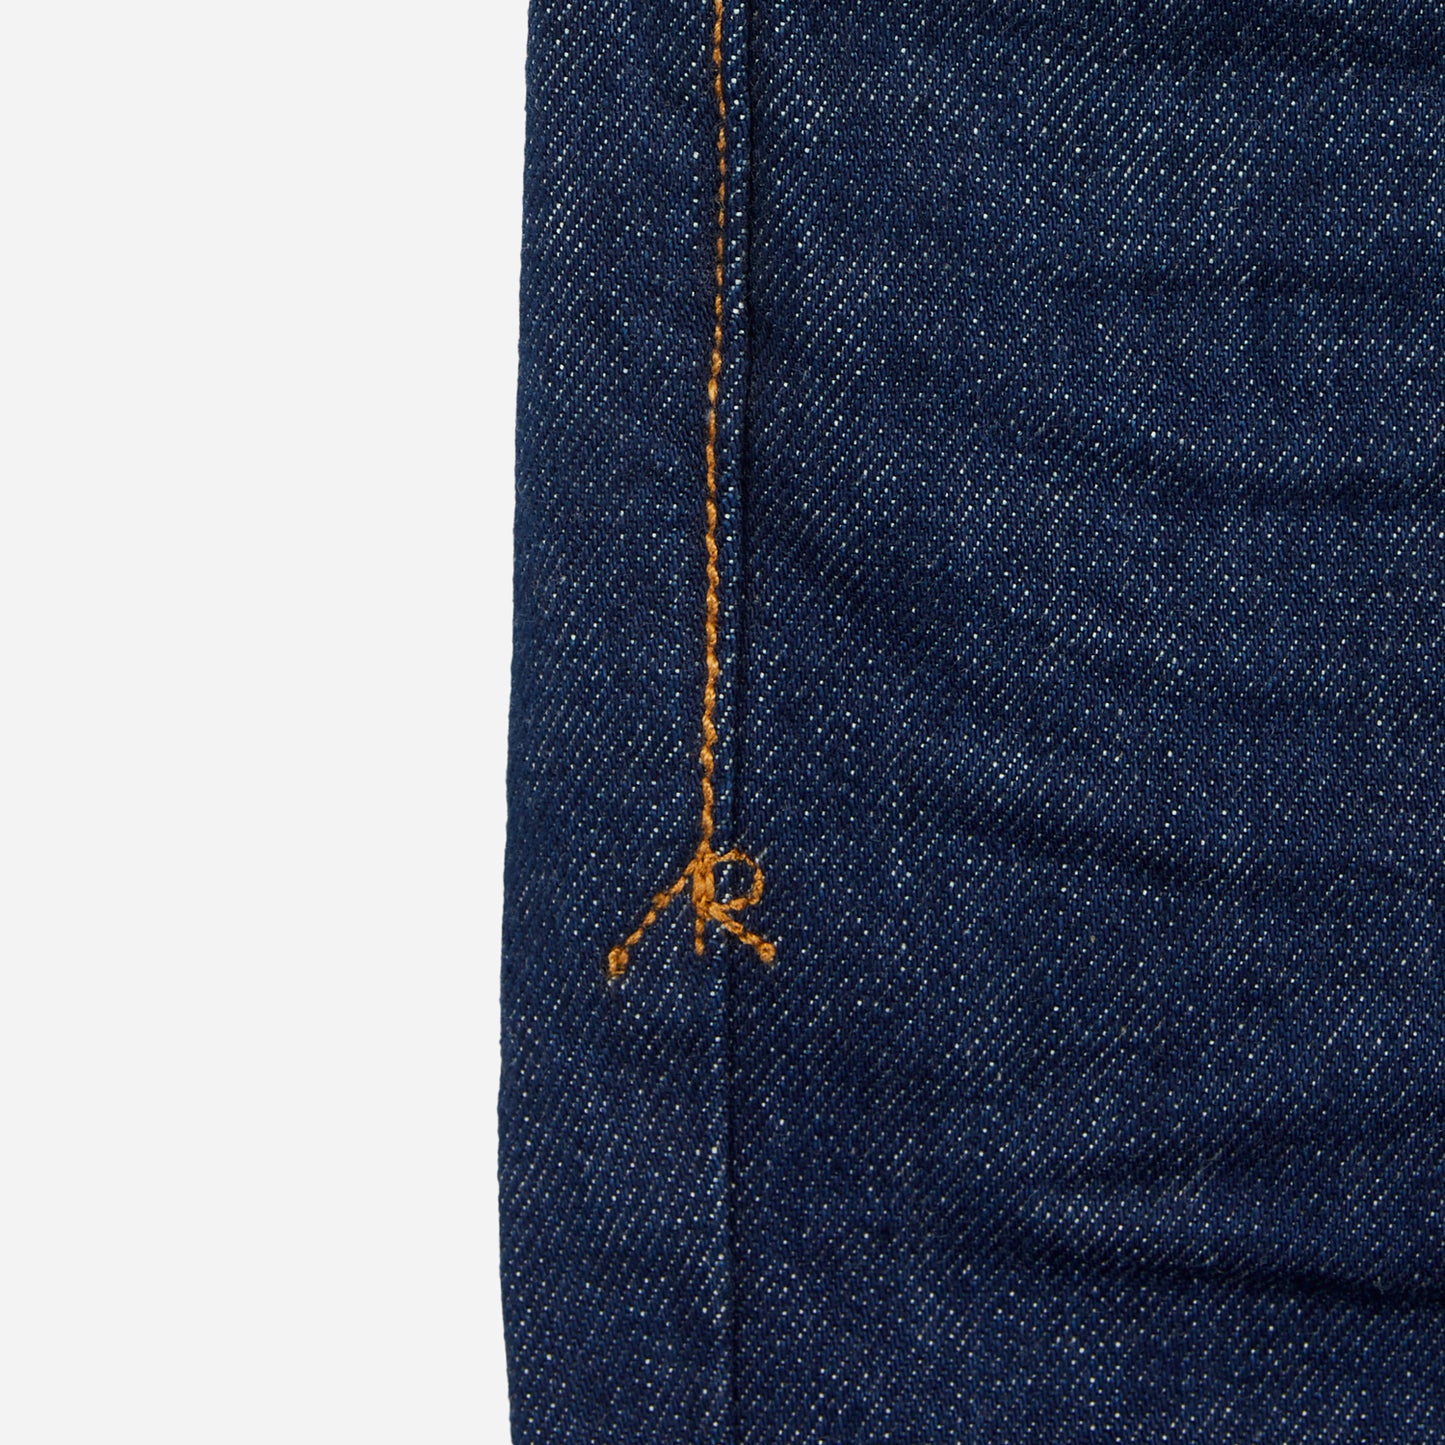 close up of stitching on pair of dark blue athletic taper jeans with no wear